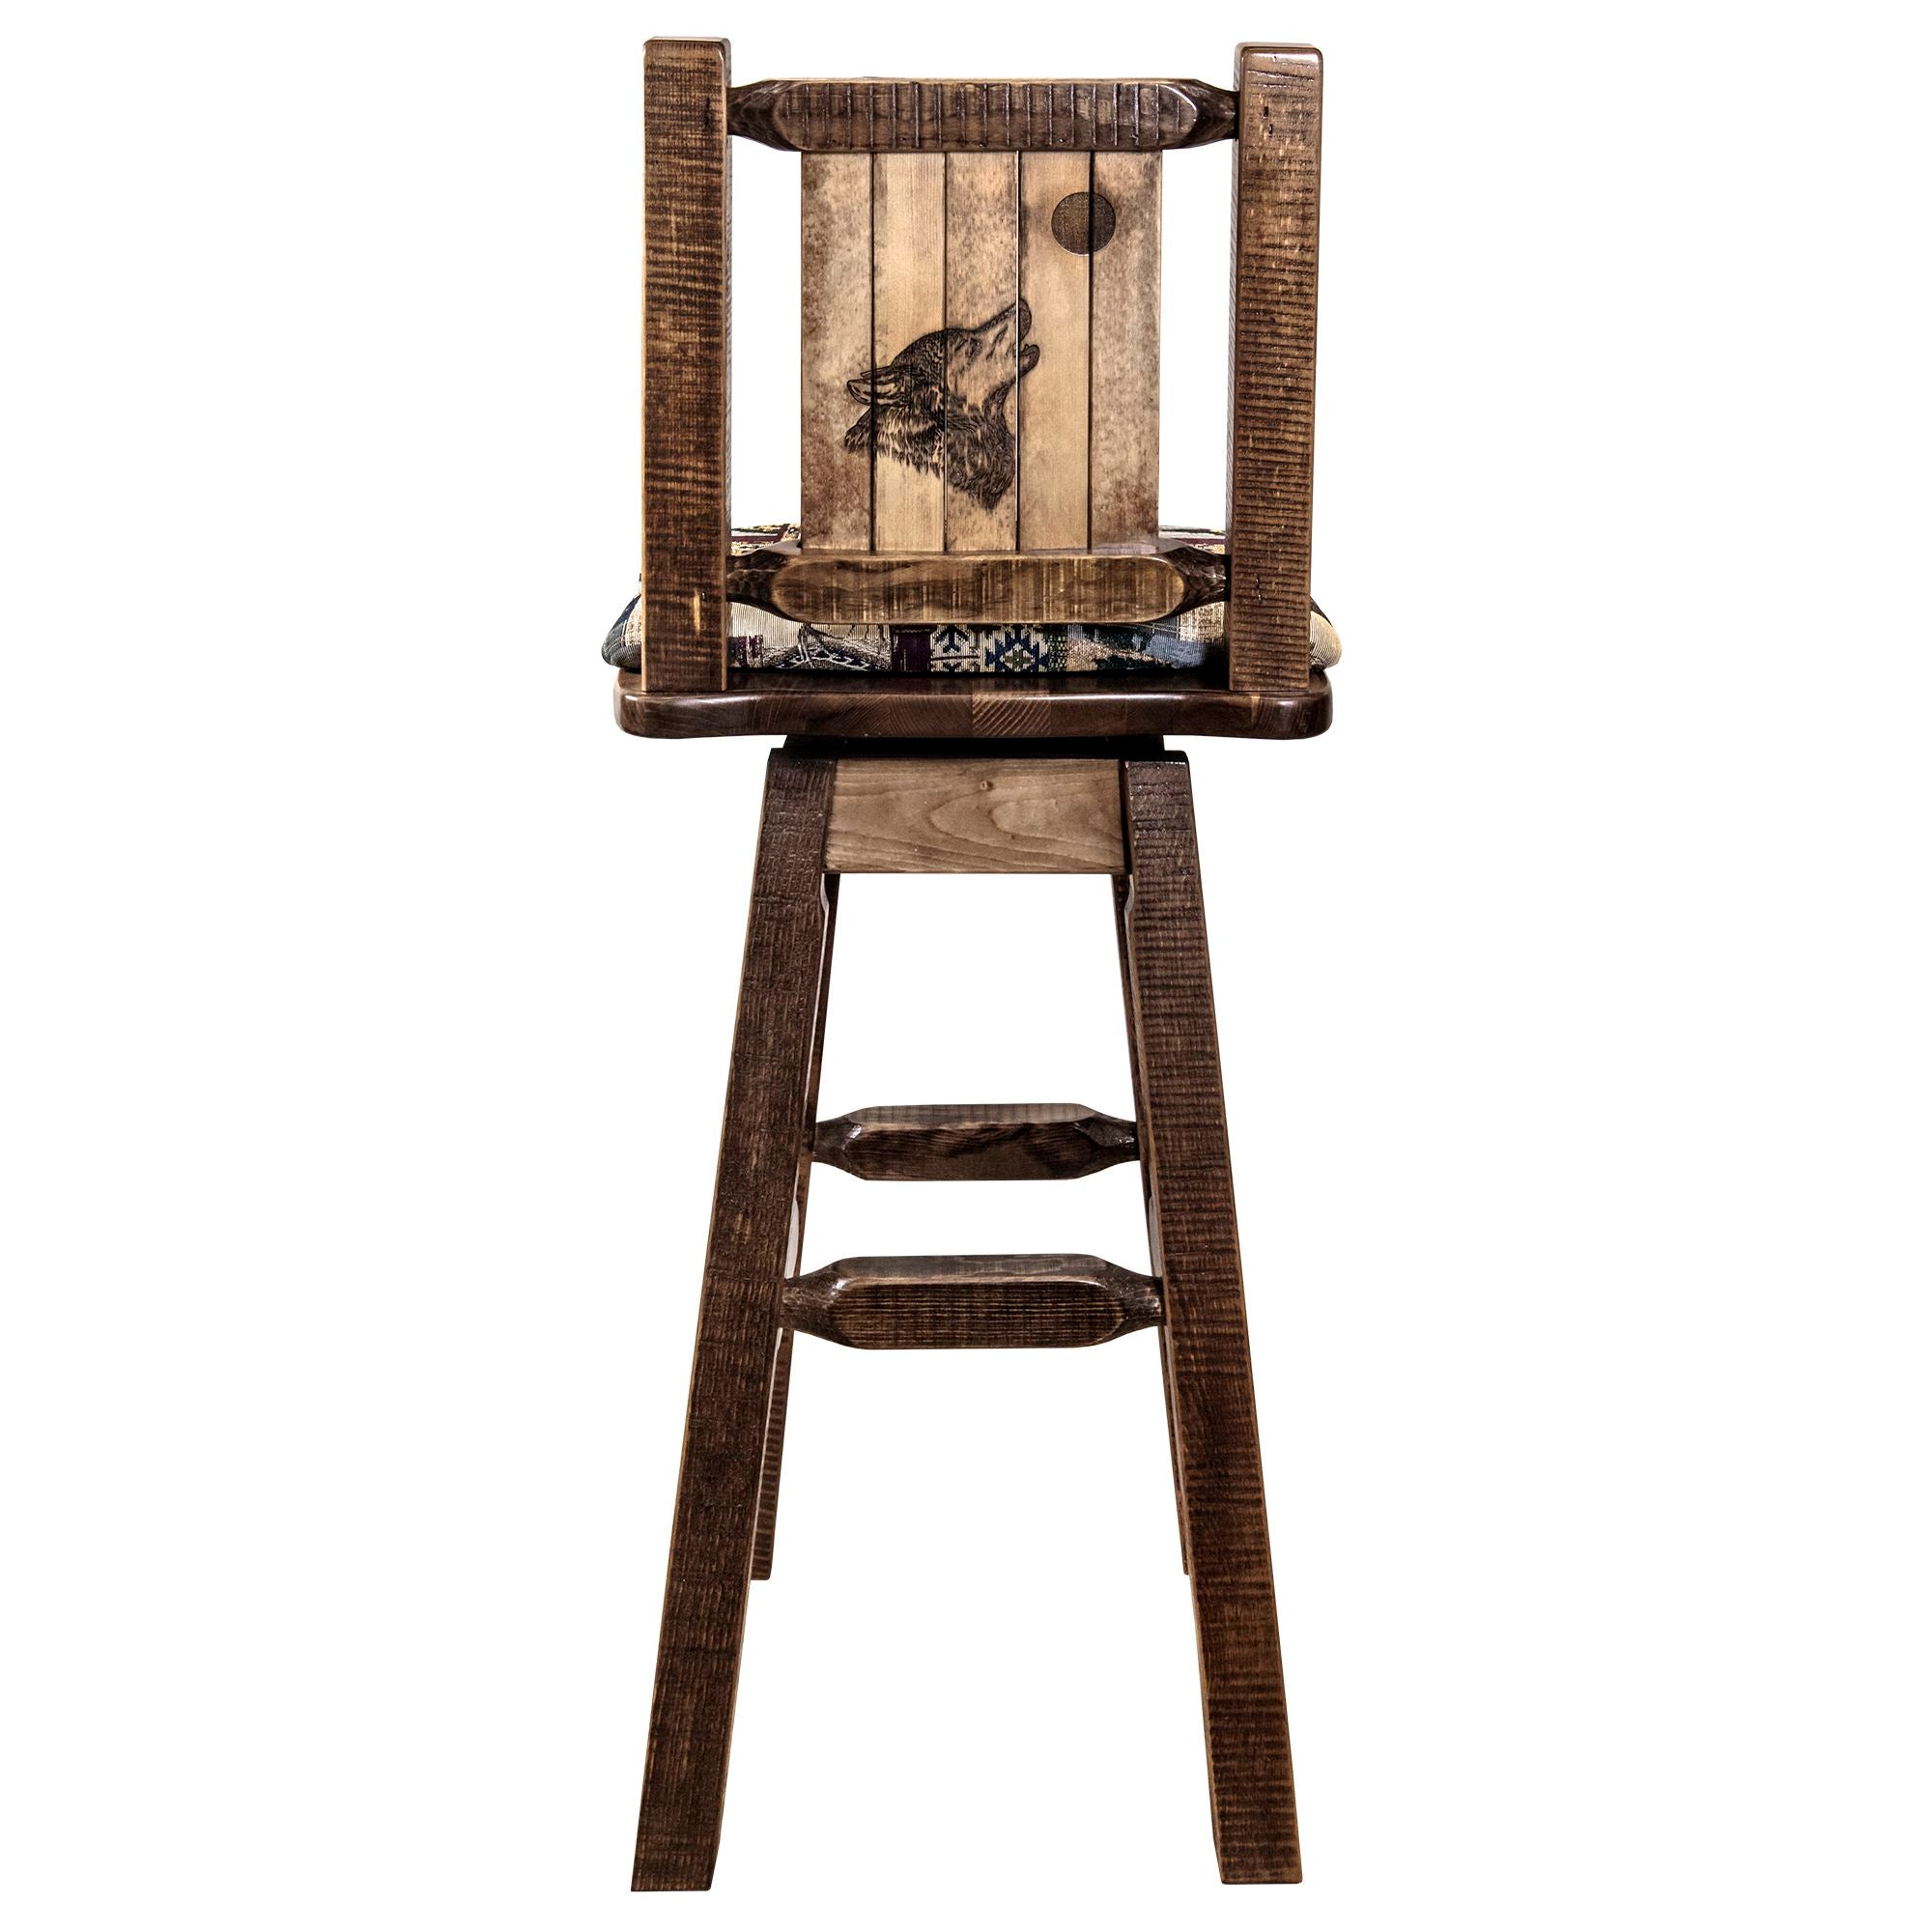 montana woodworks homestead collection barstool with back and swivel woodland pattern upholstery and laser engraved wolf design mwhcbswsnrslwolf back